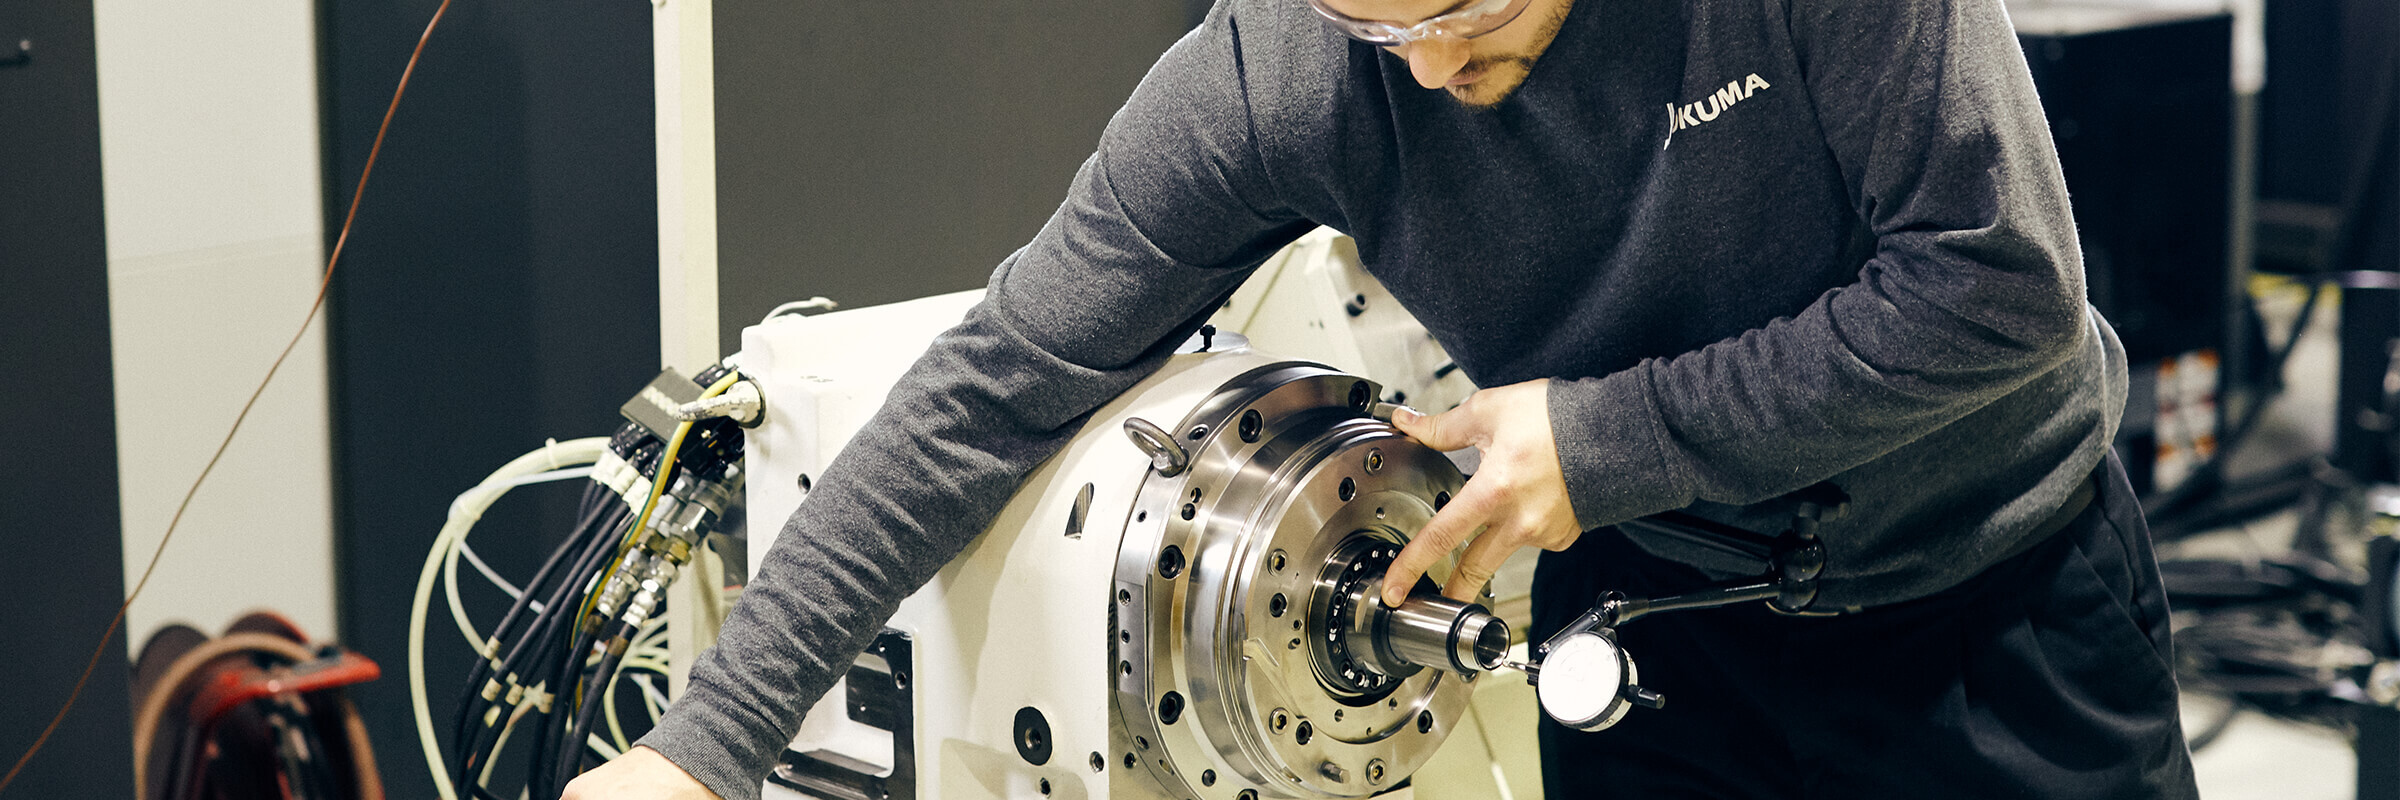 Spindle and Spindle Drive Repair: 10 Steps Okuma Takes to Ensure Quality Repairs